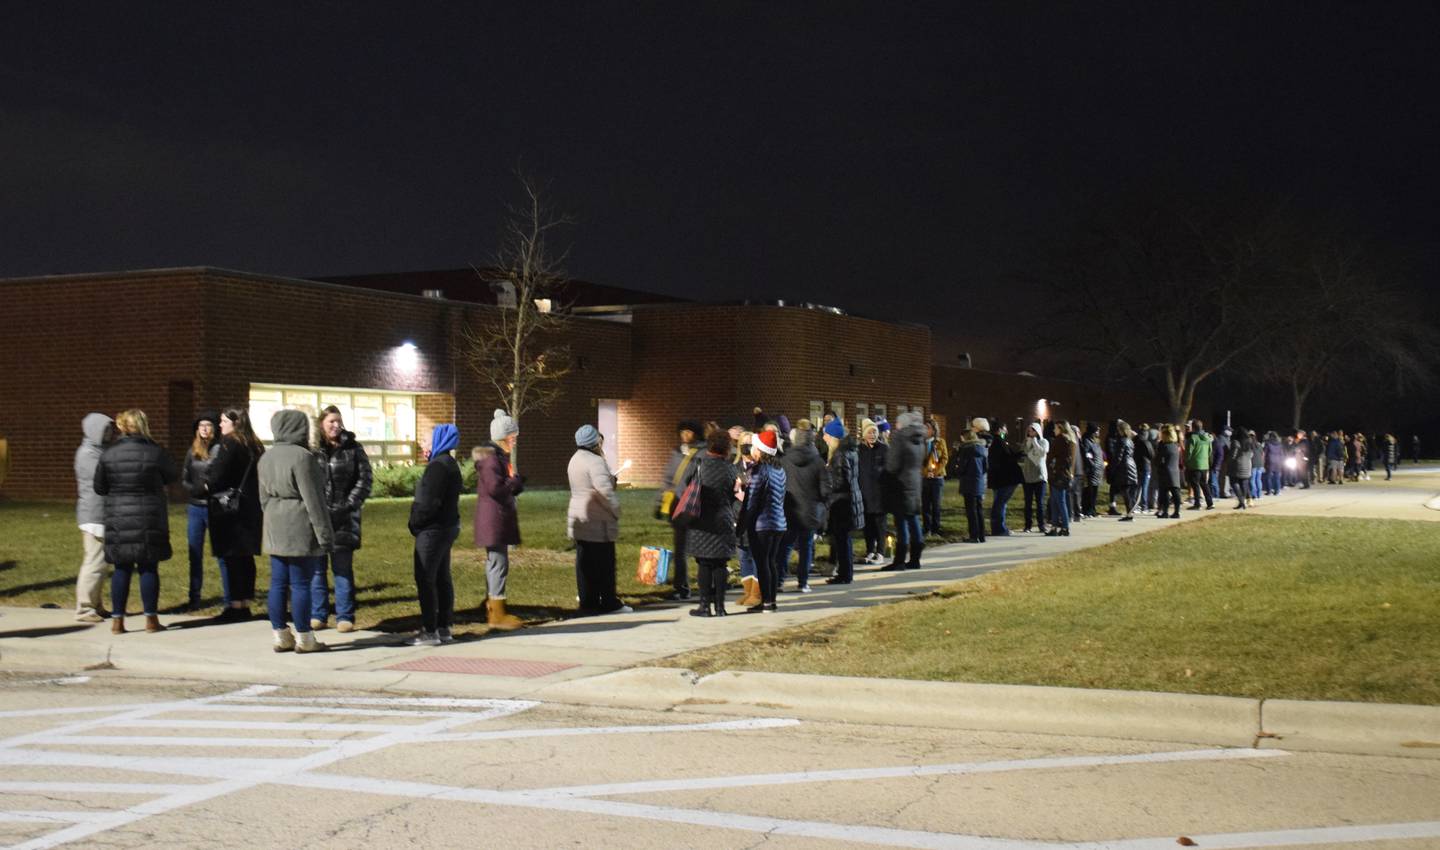 More than 300 people attended a candlelight vigil on Tuesday, Dec. 14, 2021, outside Sycamore Middle School because the Sycamore Education Association and Sycamore School District 427 have still not yet agreed upon a contract. The contract expired July 31.